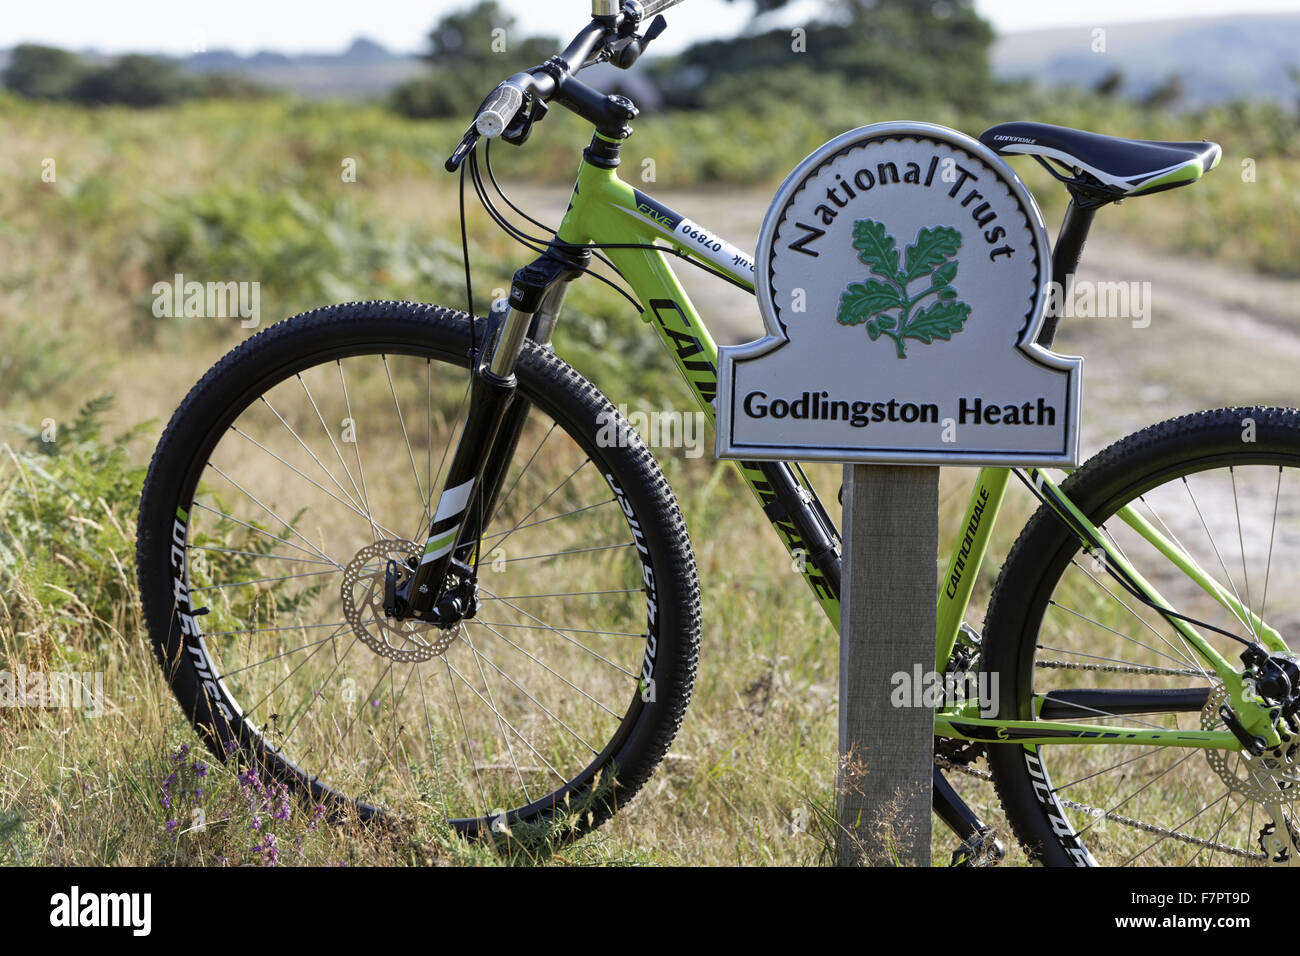 Bike leaning against a sign for Godlingston Heath on the Greenlands Track, Studland, Dorset, part of the Rempstone Ride cycle route. There are more than 54 miles of paths and bridleways for visitors to explore in Purbeck. Stock Photo